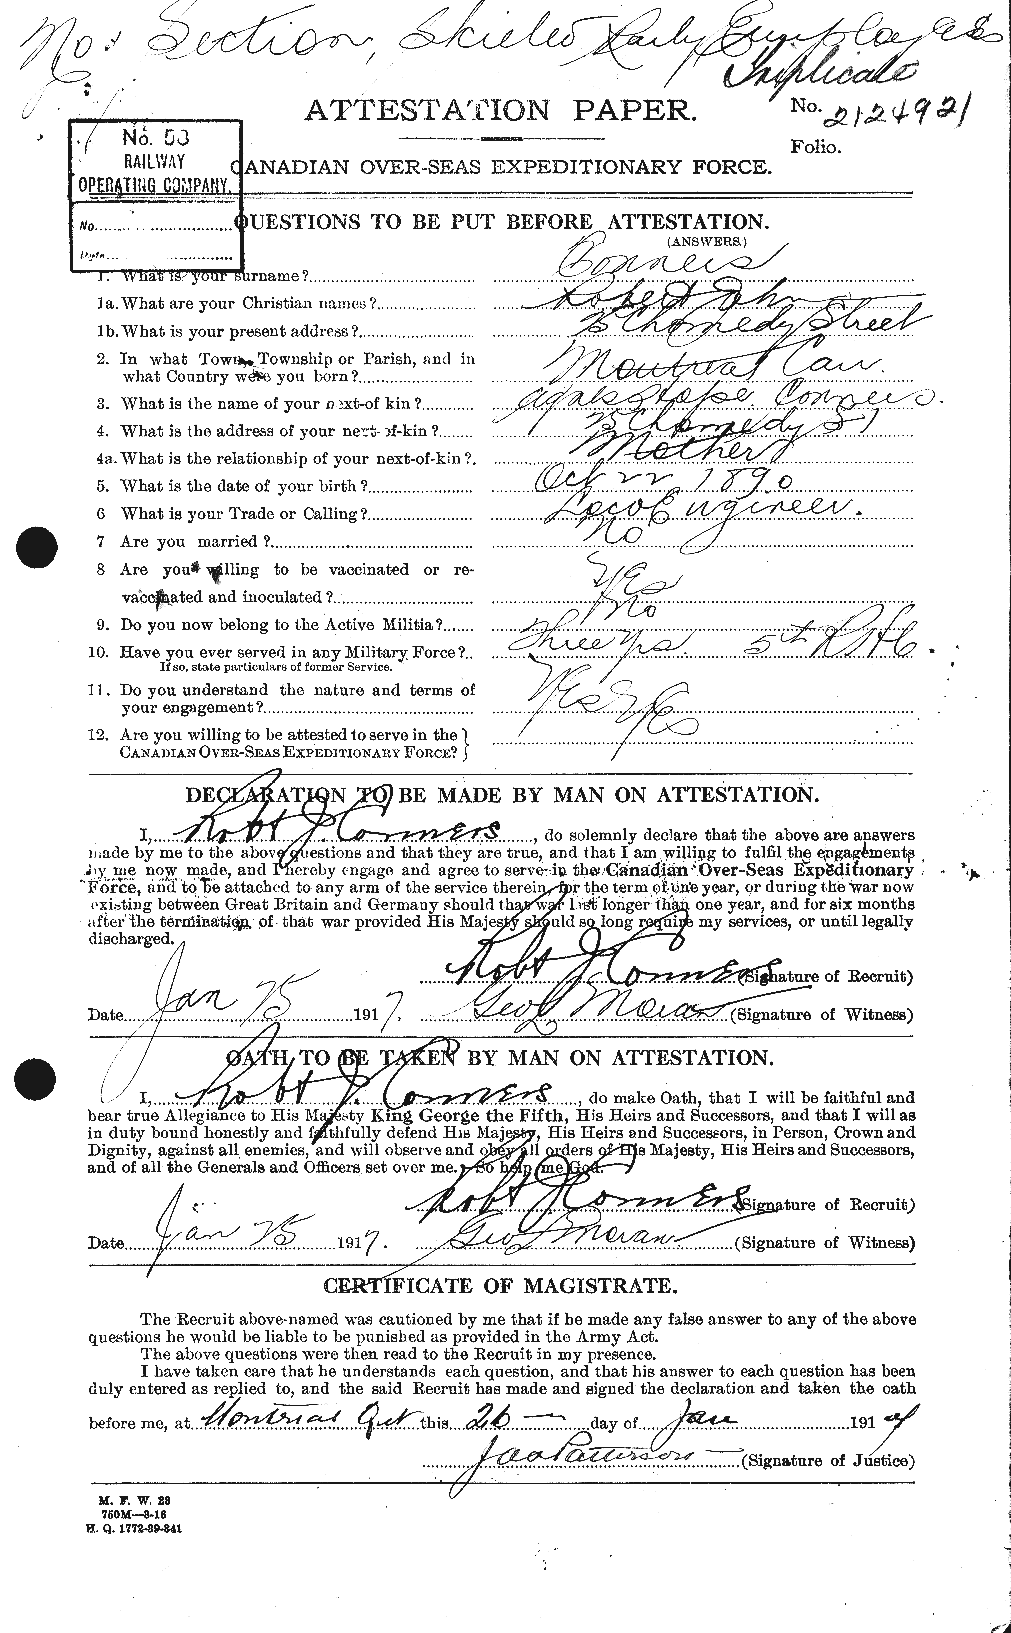 Personnel Records of the First World War - CEF 068924a